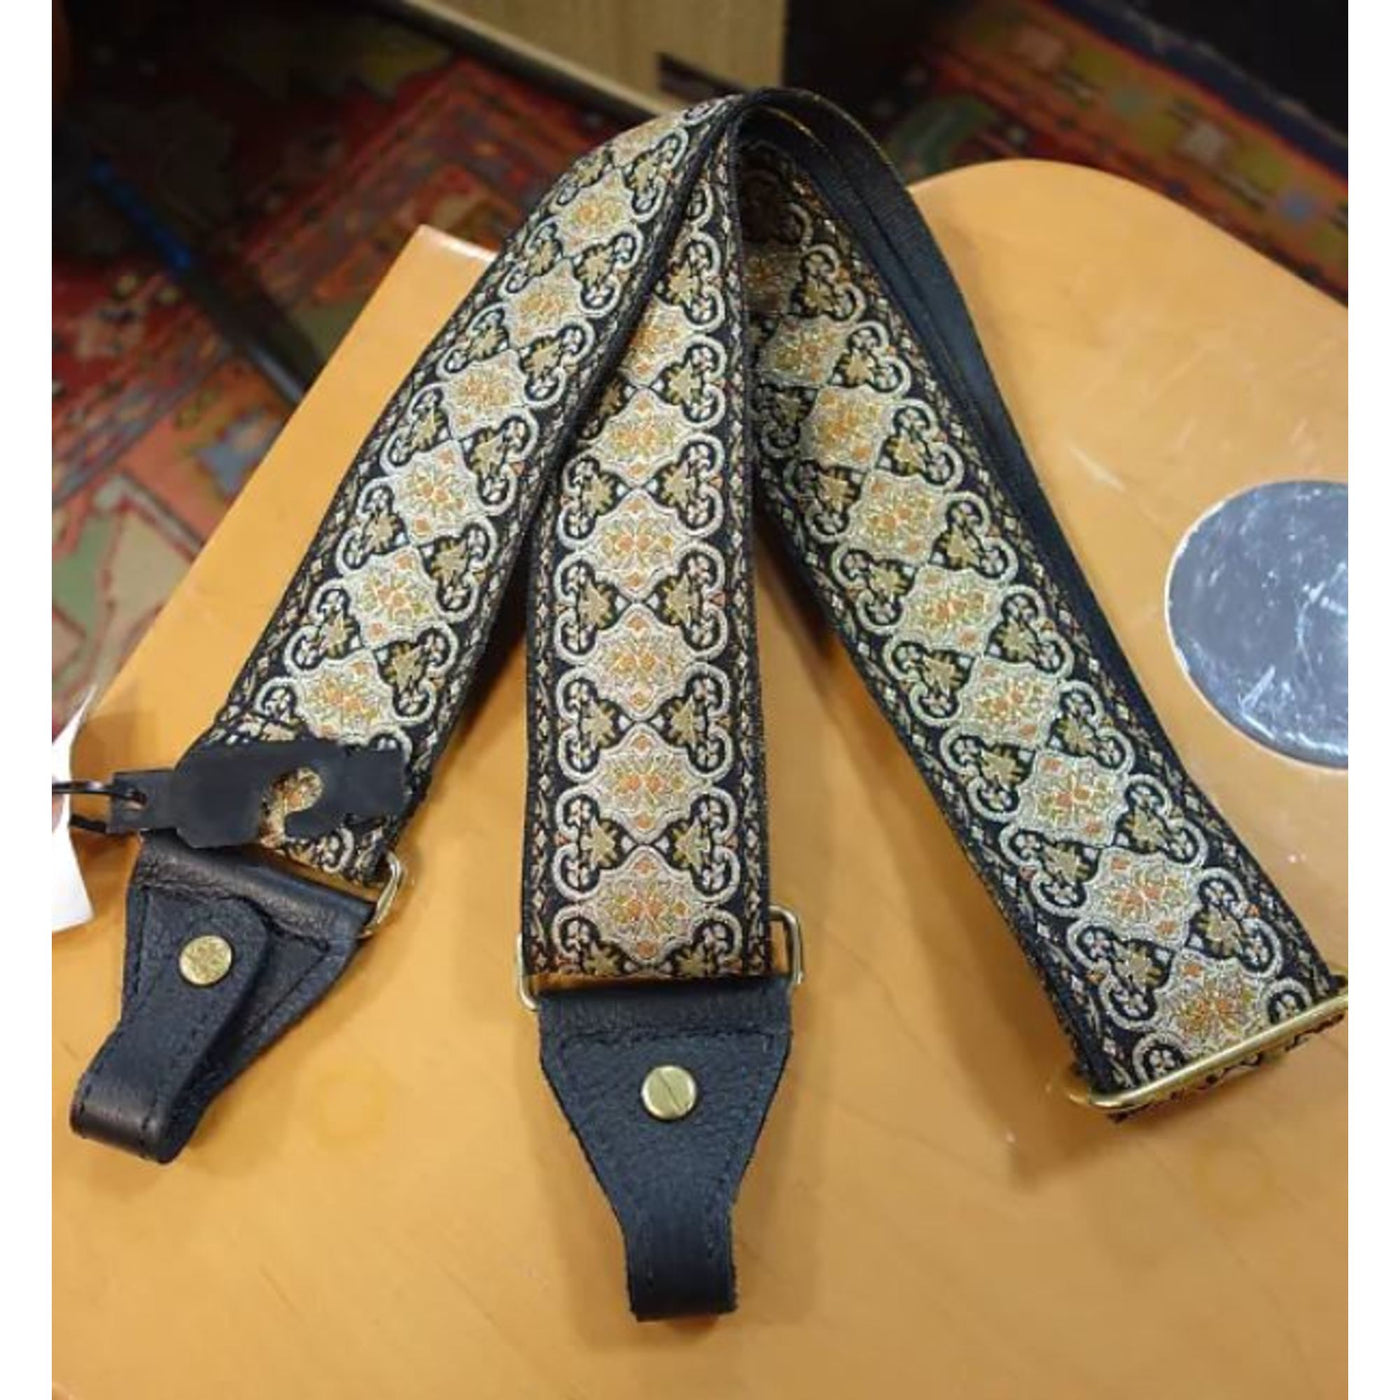 Souldier BJC0000BK04BK - Handmade Souldier Solid Banjo Strap, 2 Inches Wide and Adjustable from 33" to 60" Made in the USA, Black